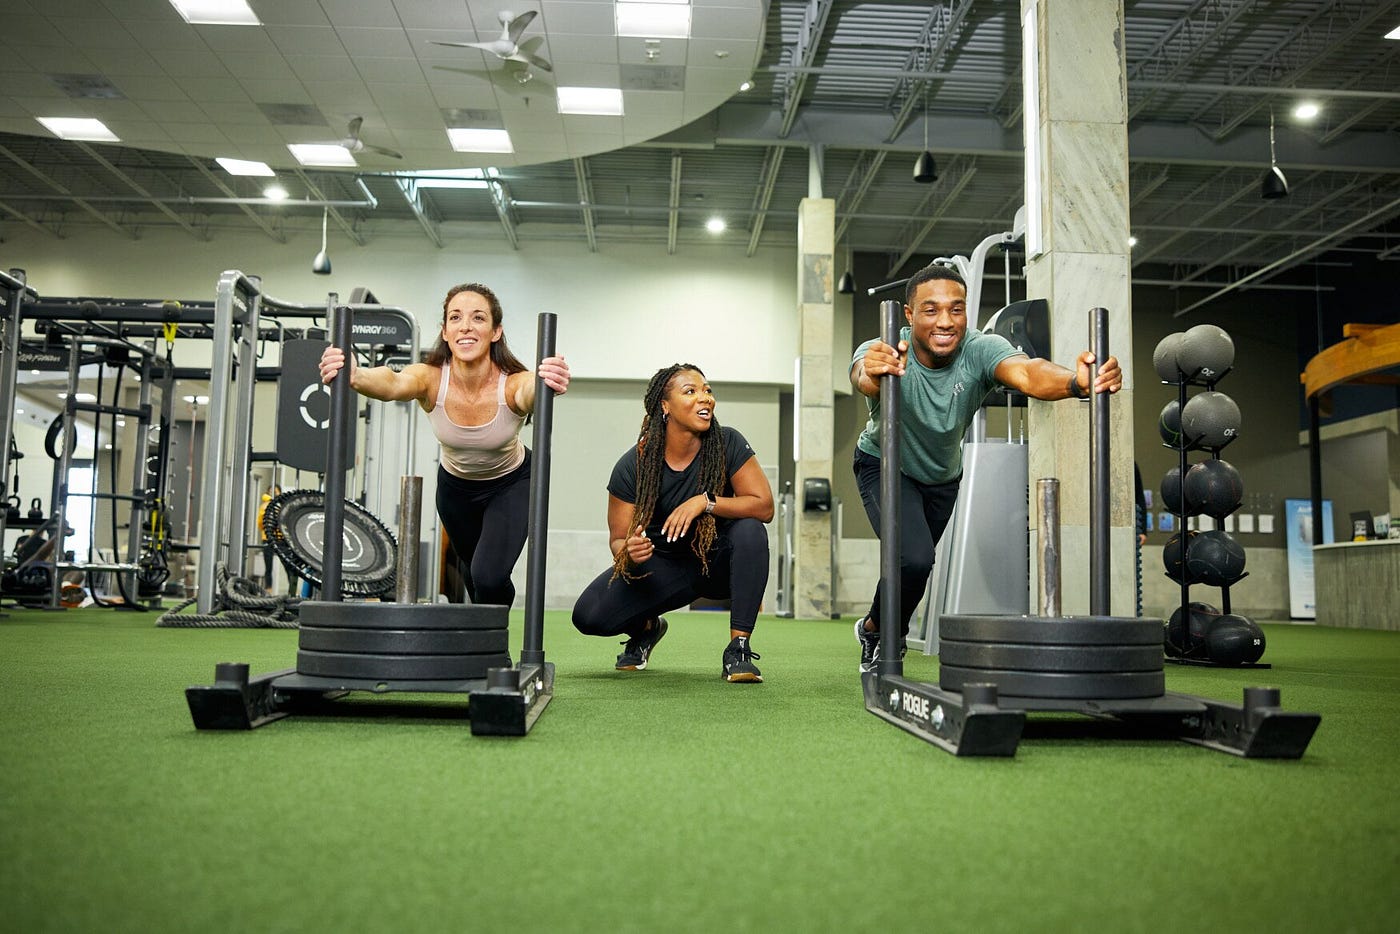 Onelife Fitness Gyms in VA, MD, DC & GA